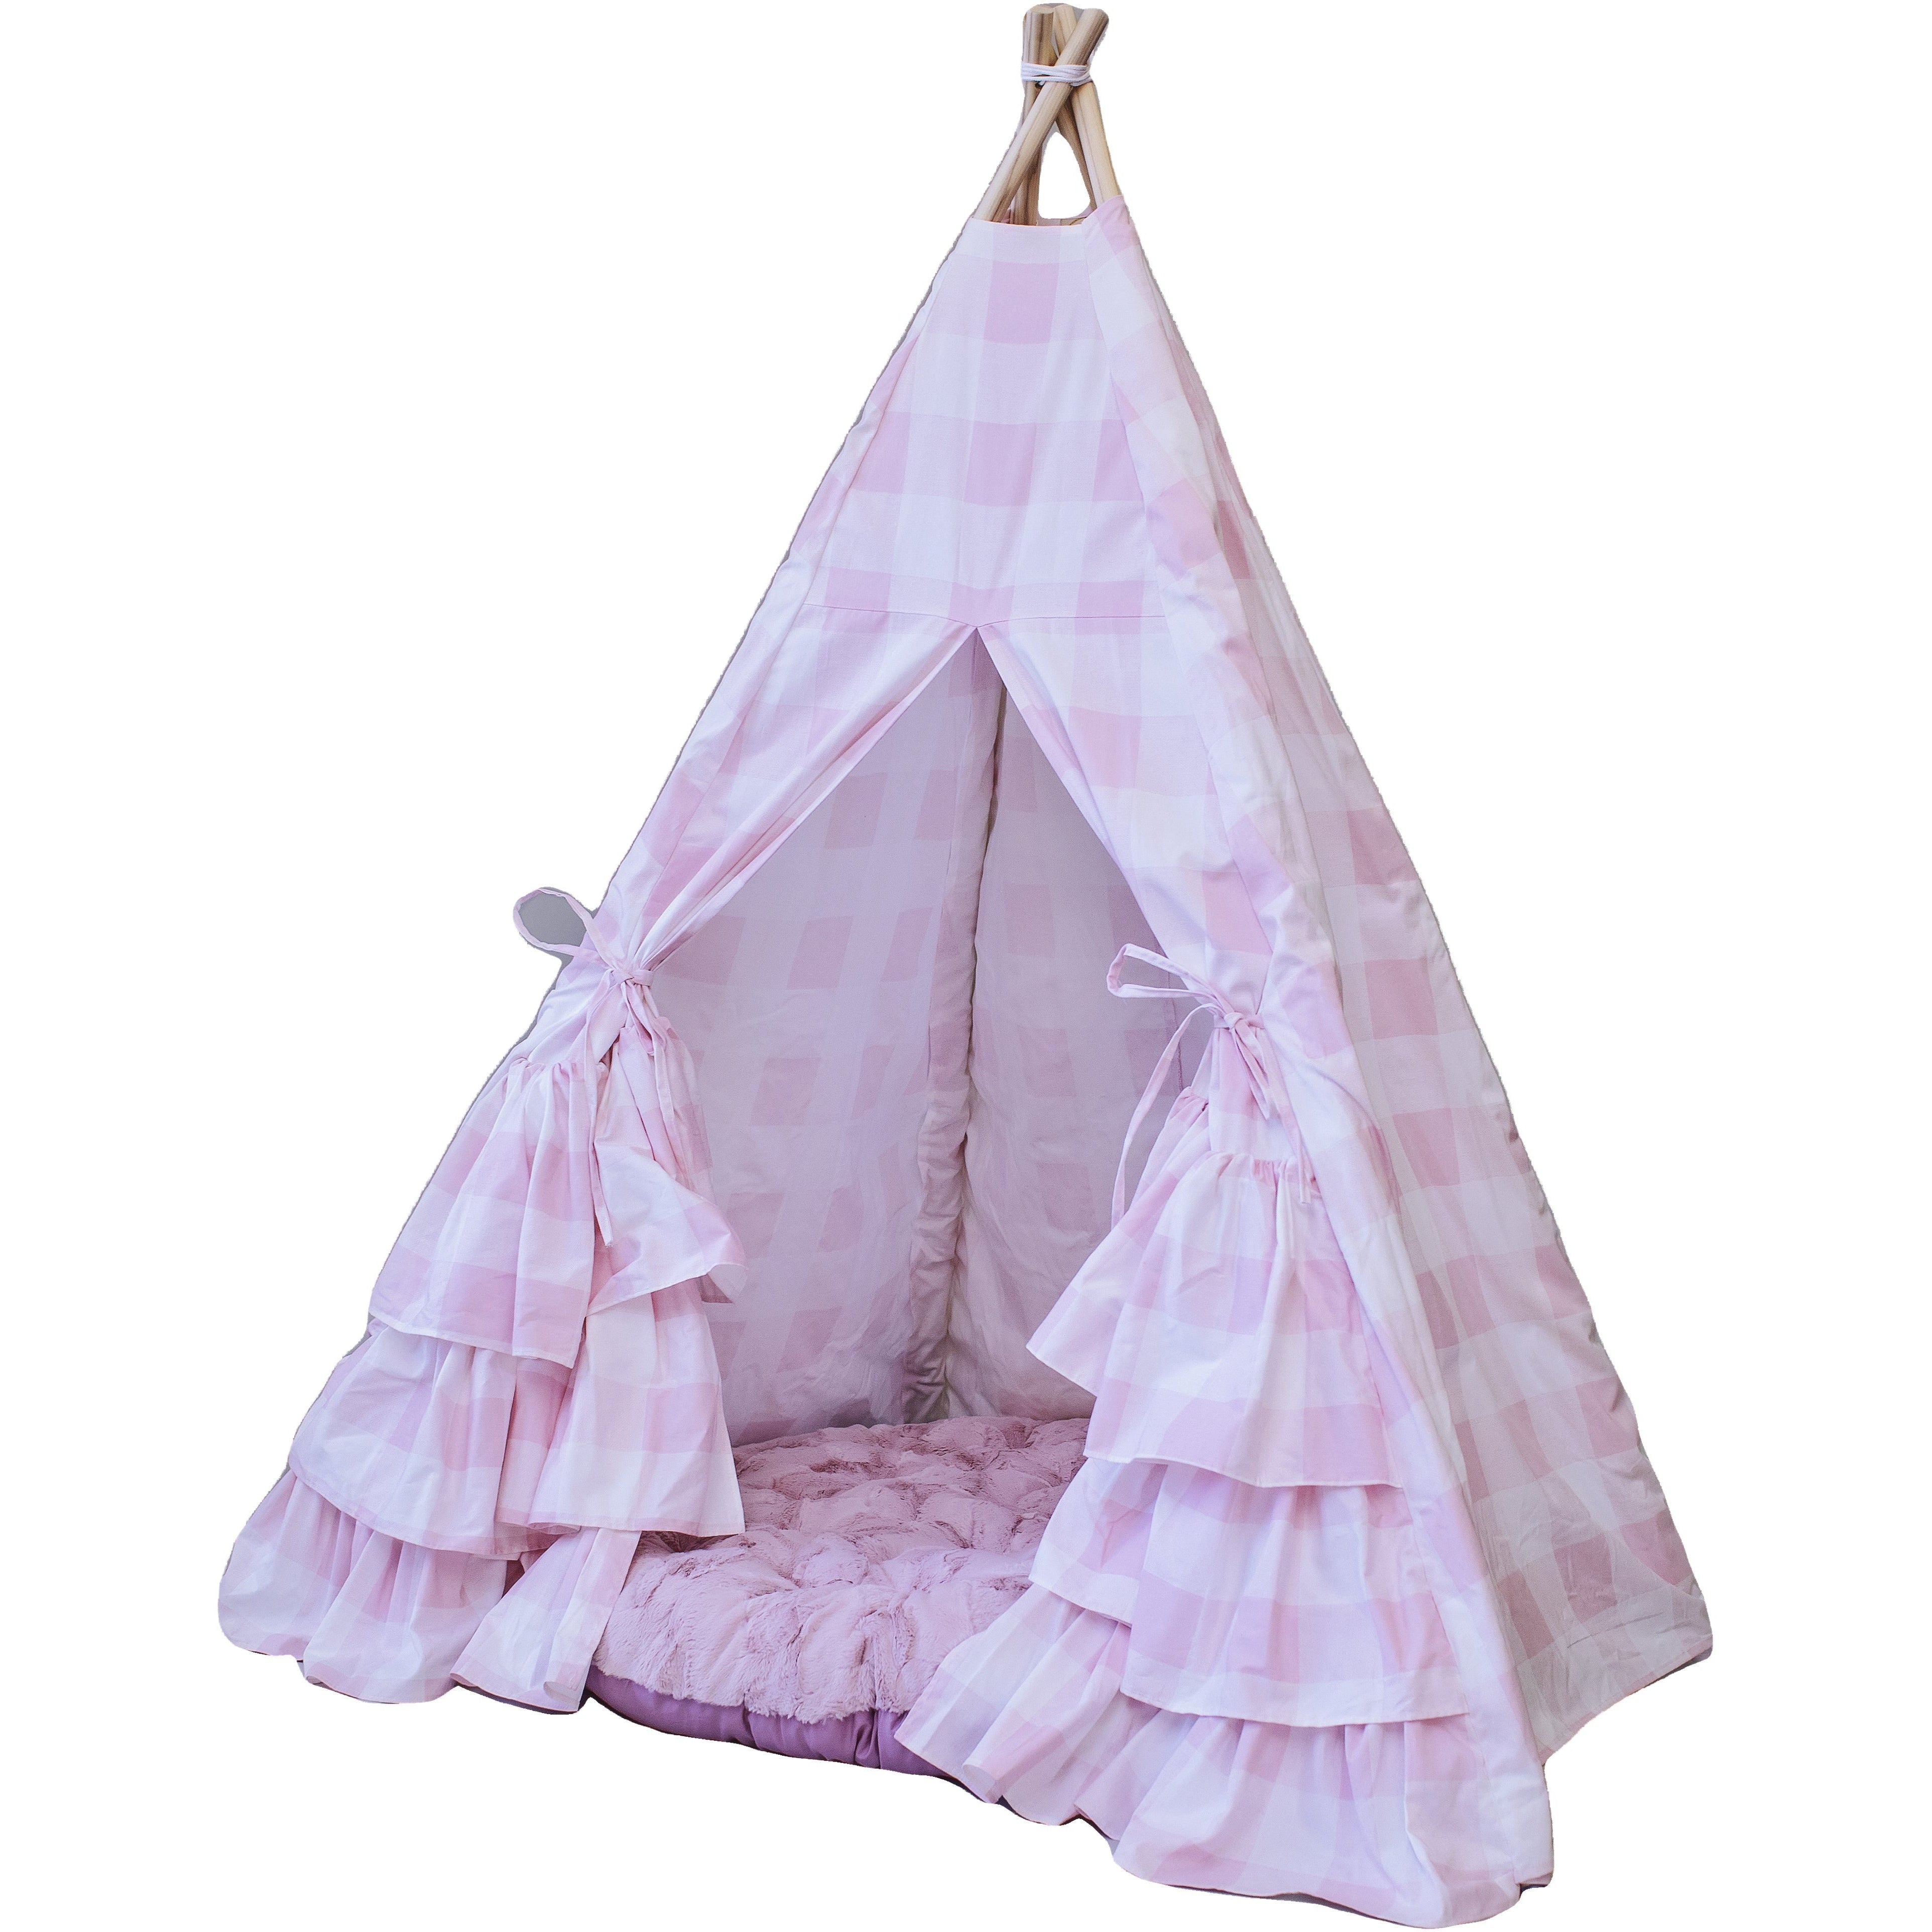 The Cecile Ruffle Play Tent